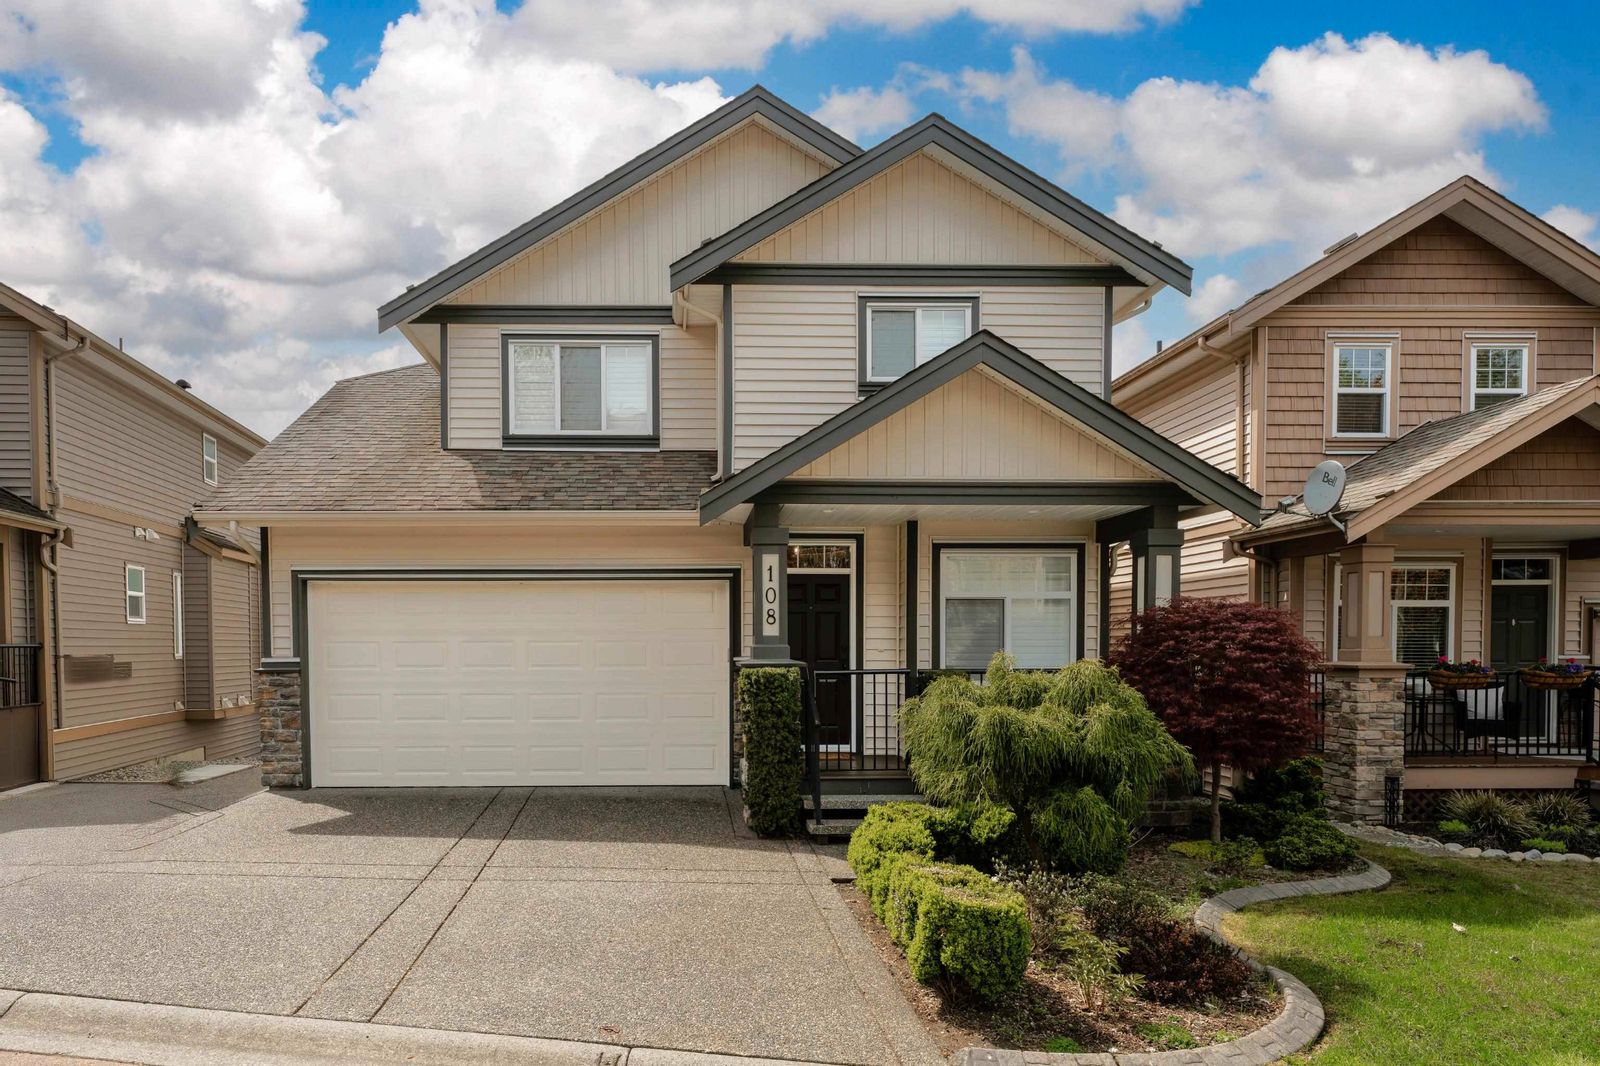 We have sold (bought) a property at 108 23925 116 AVENUE AVE in MAPLE RIDGE